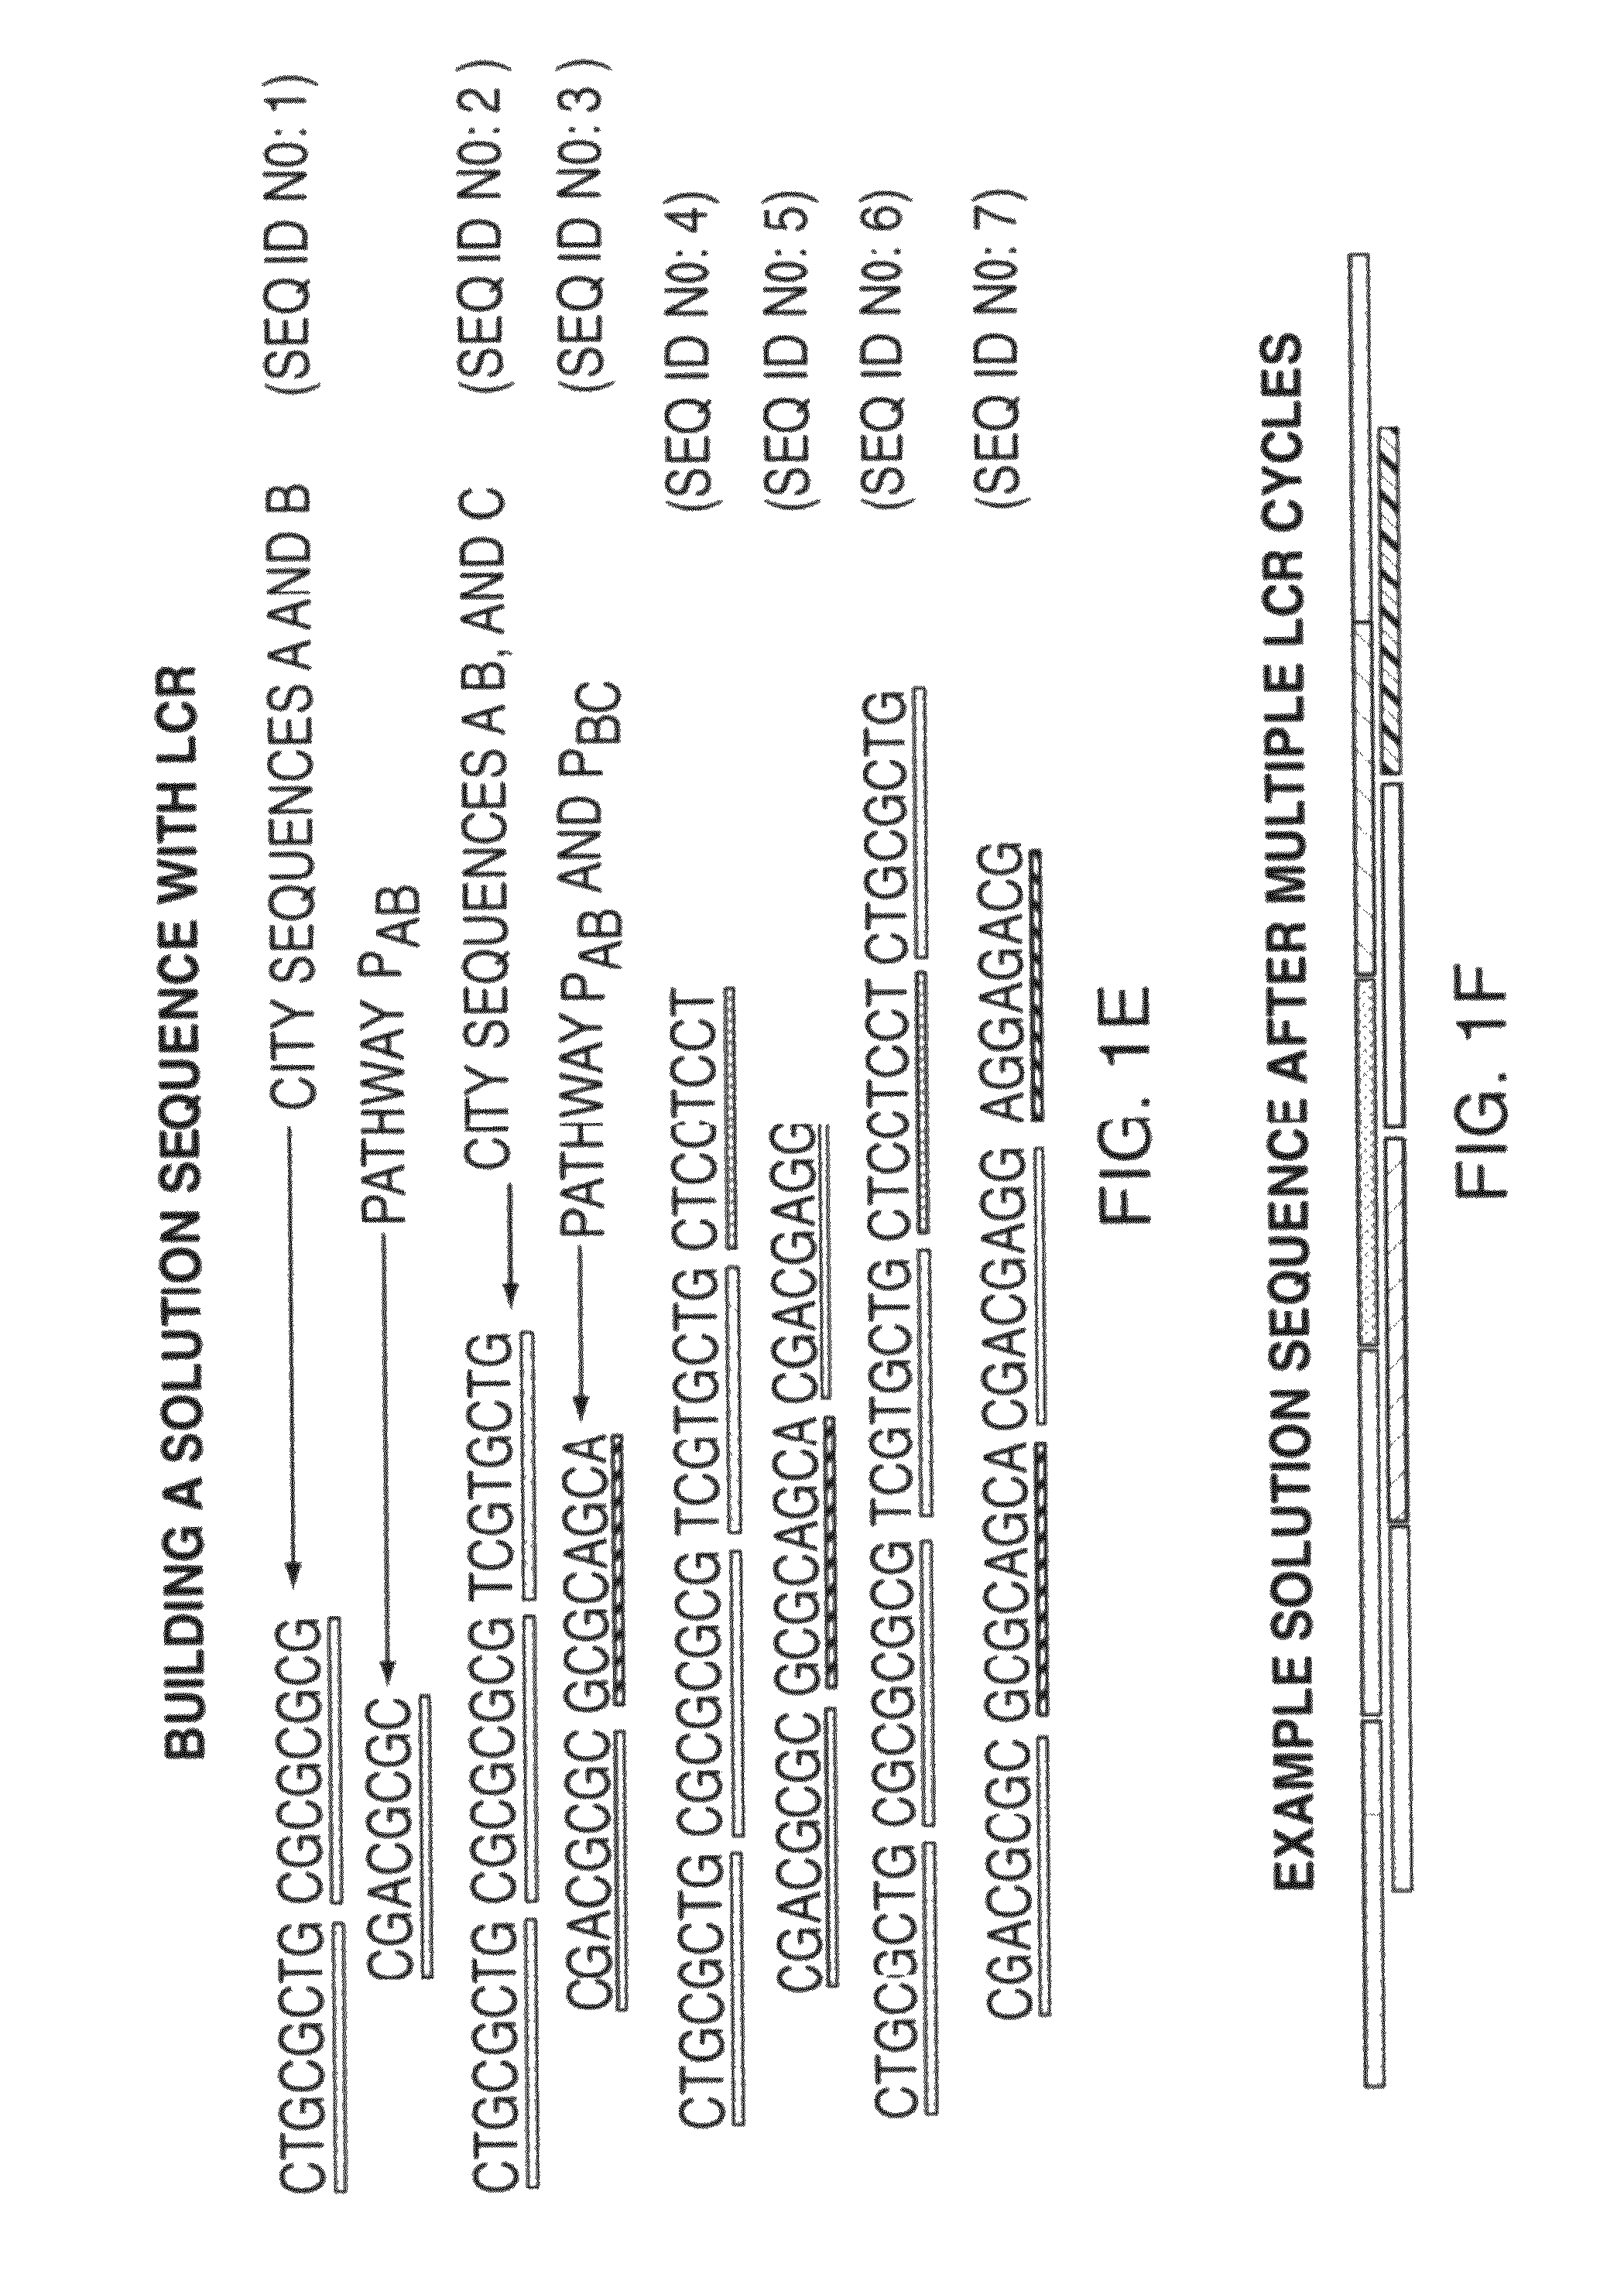 Methods for generating a distribution of optimal solutions to nondeterministic polynomial optimization problems